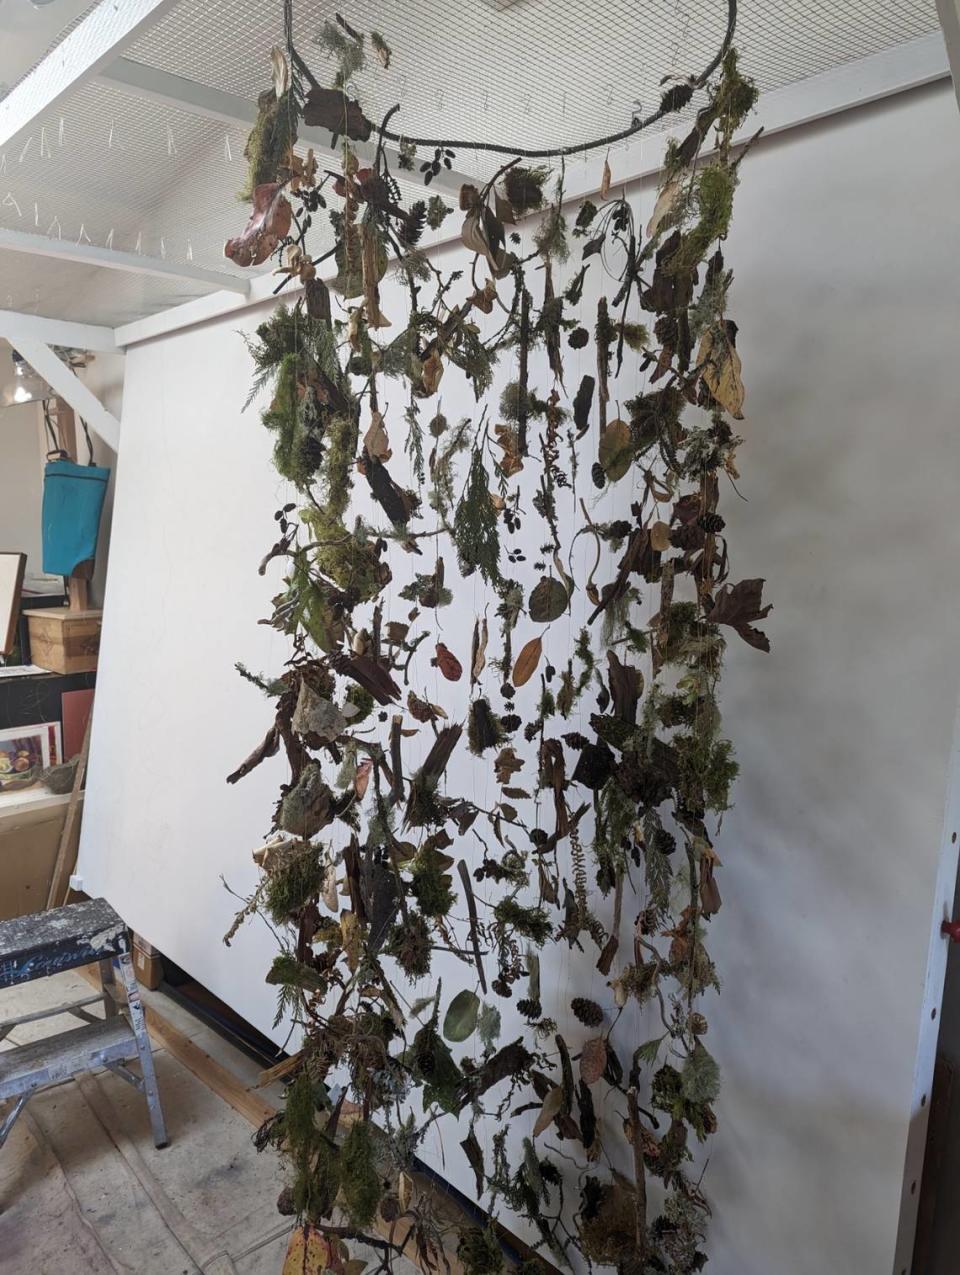 Kathy Gore-Fuss’s “Wound Wood” includes forest garlands made with help from artistic volunteers.